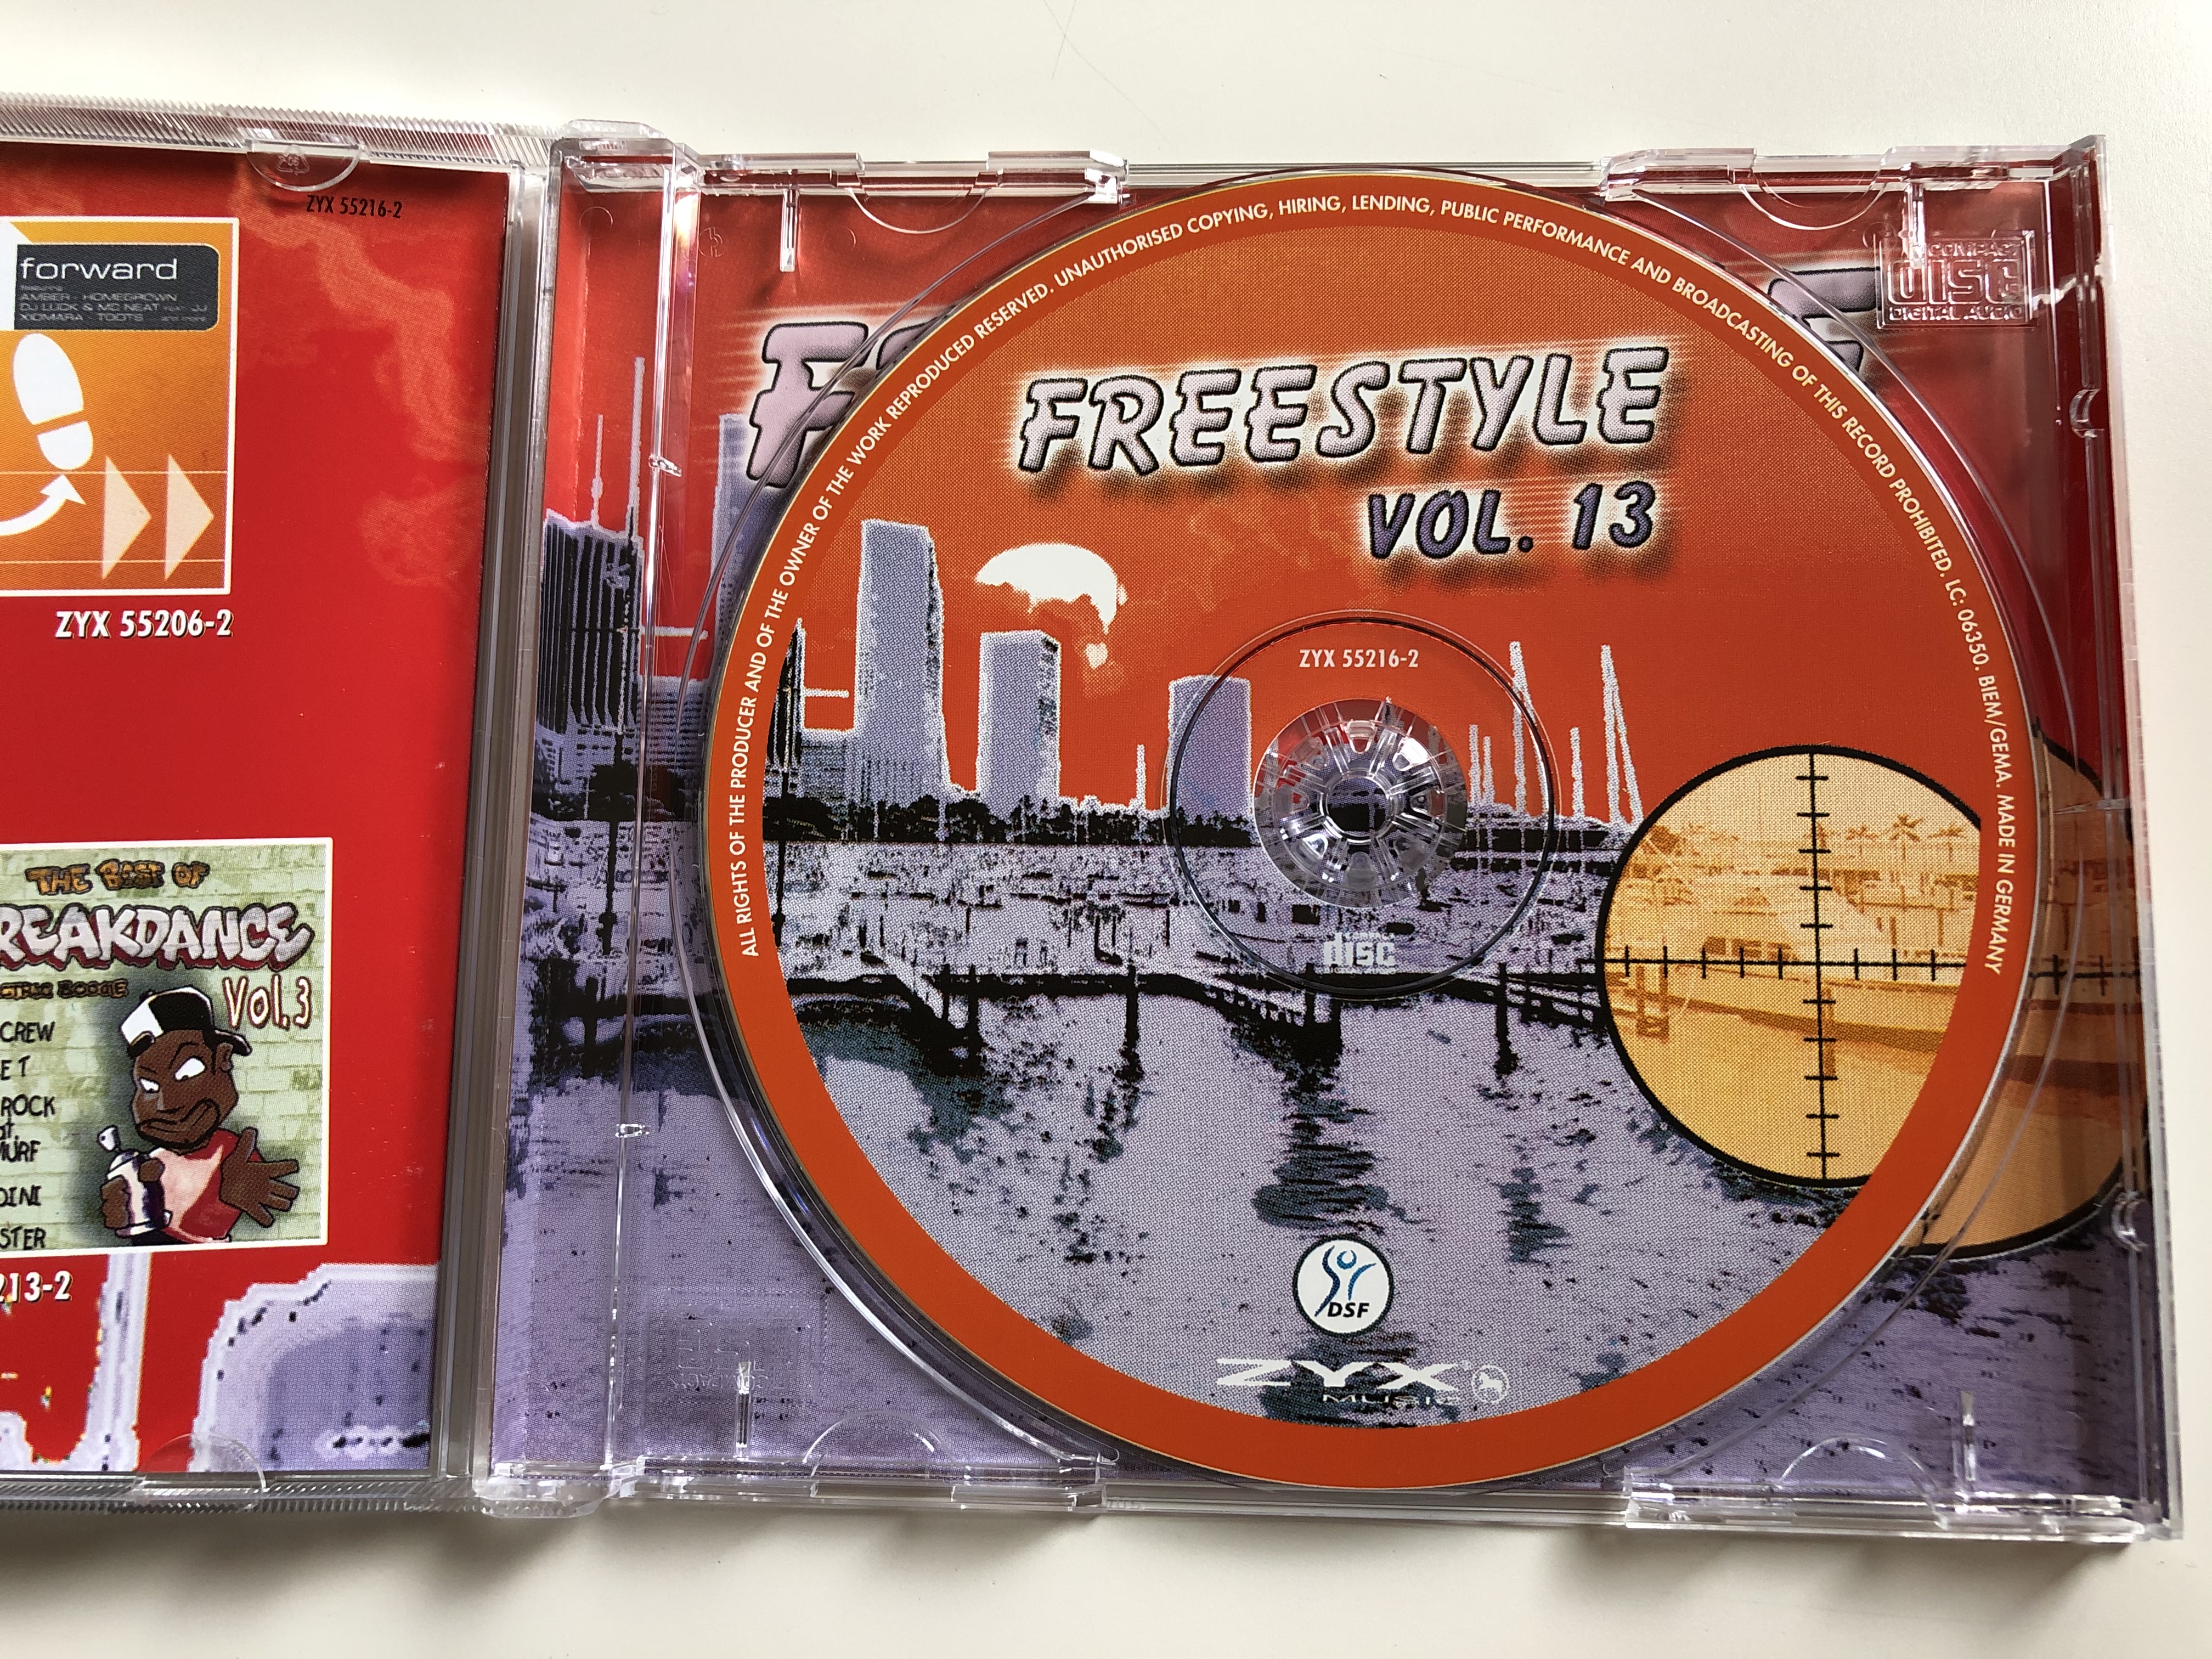 freestyle-vol.-13-incl.-lil-suzy-roller-jam-freestyle-project-julia-evita-hernandez-collage-lisa-w.-down-low-and-many-more-zyx-music-audio-cd-2001-zyx-55216-2-2-.jpg